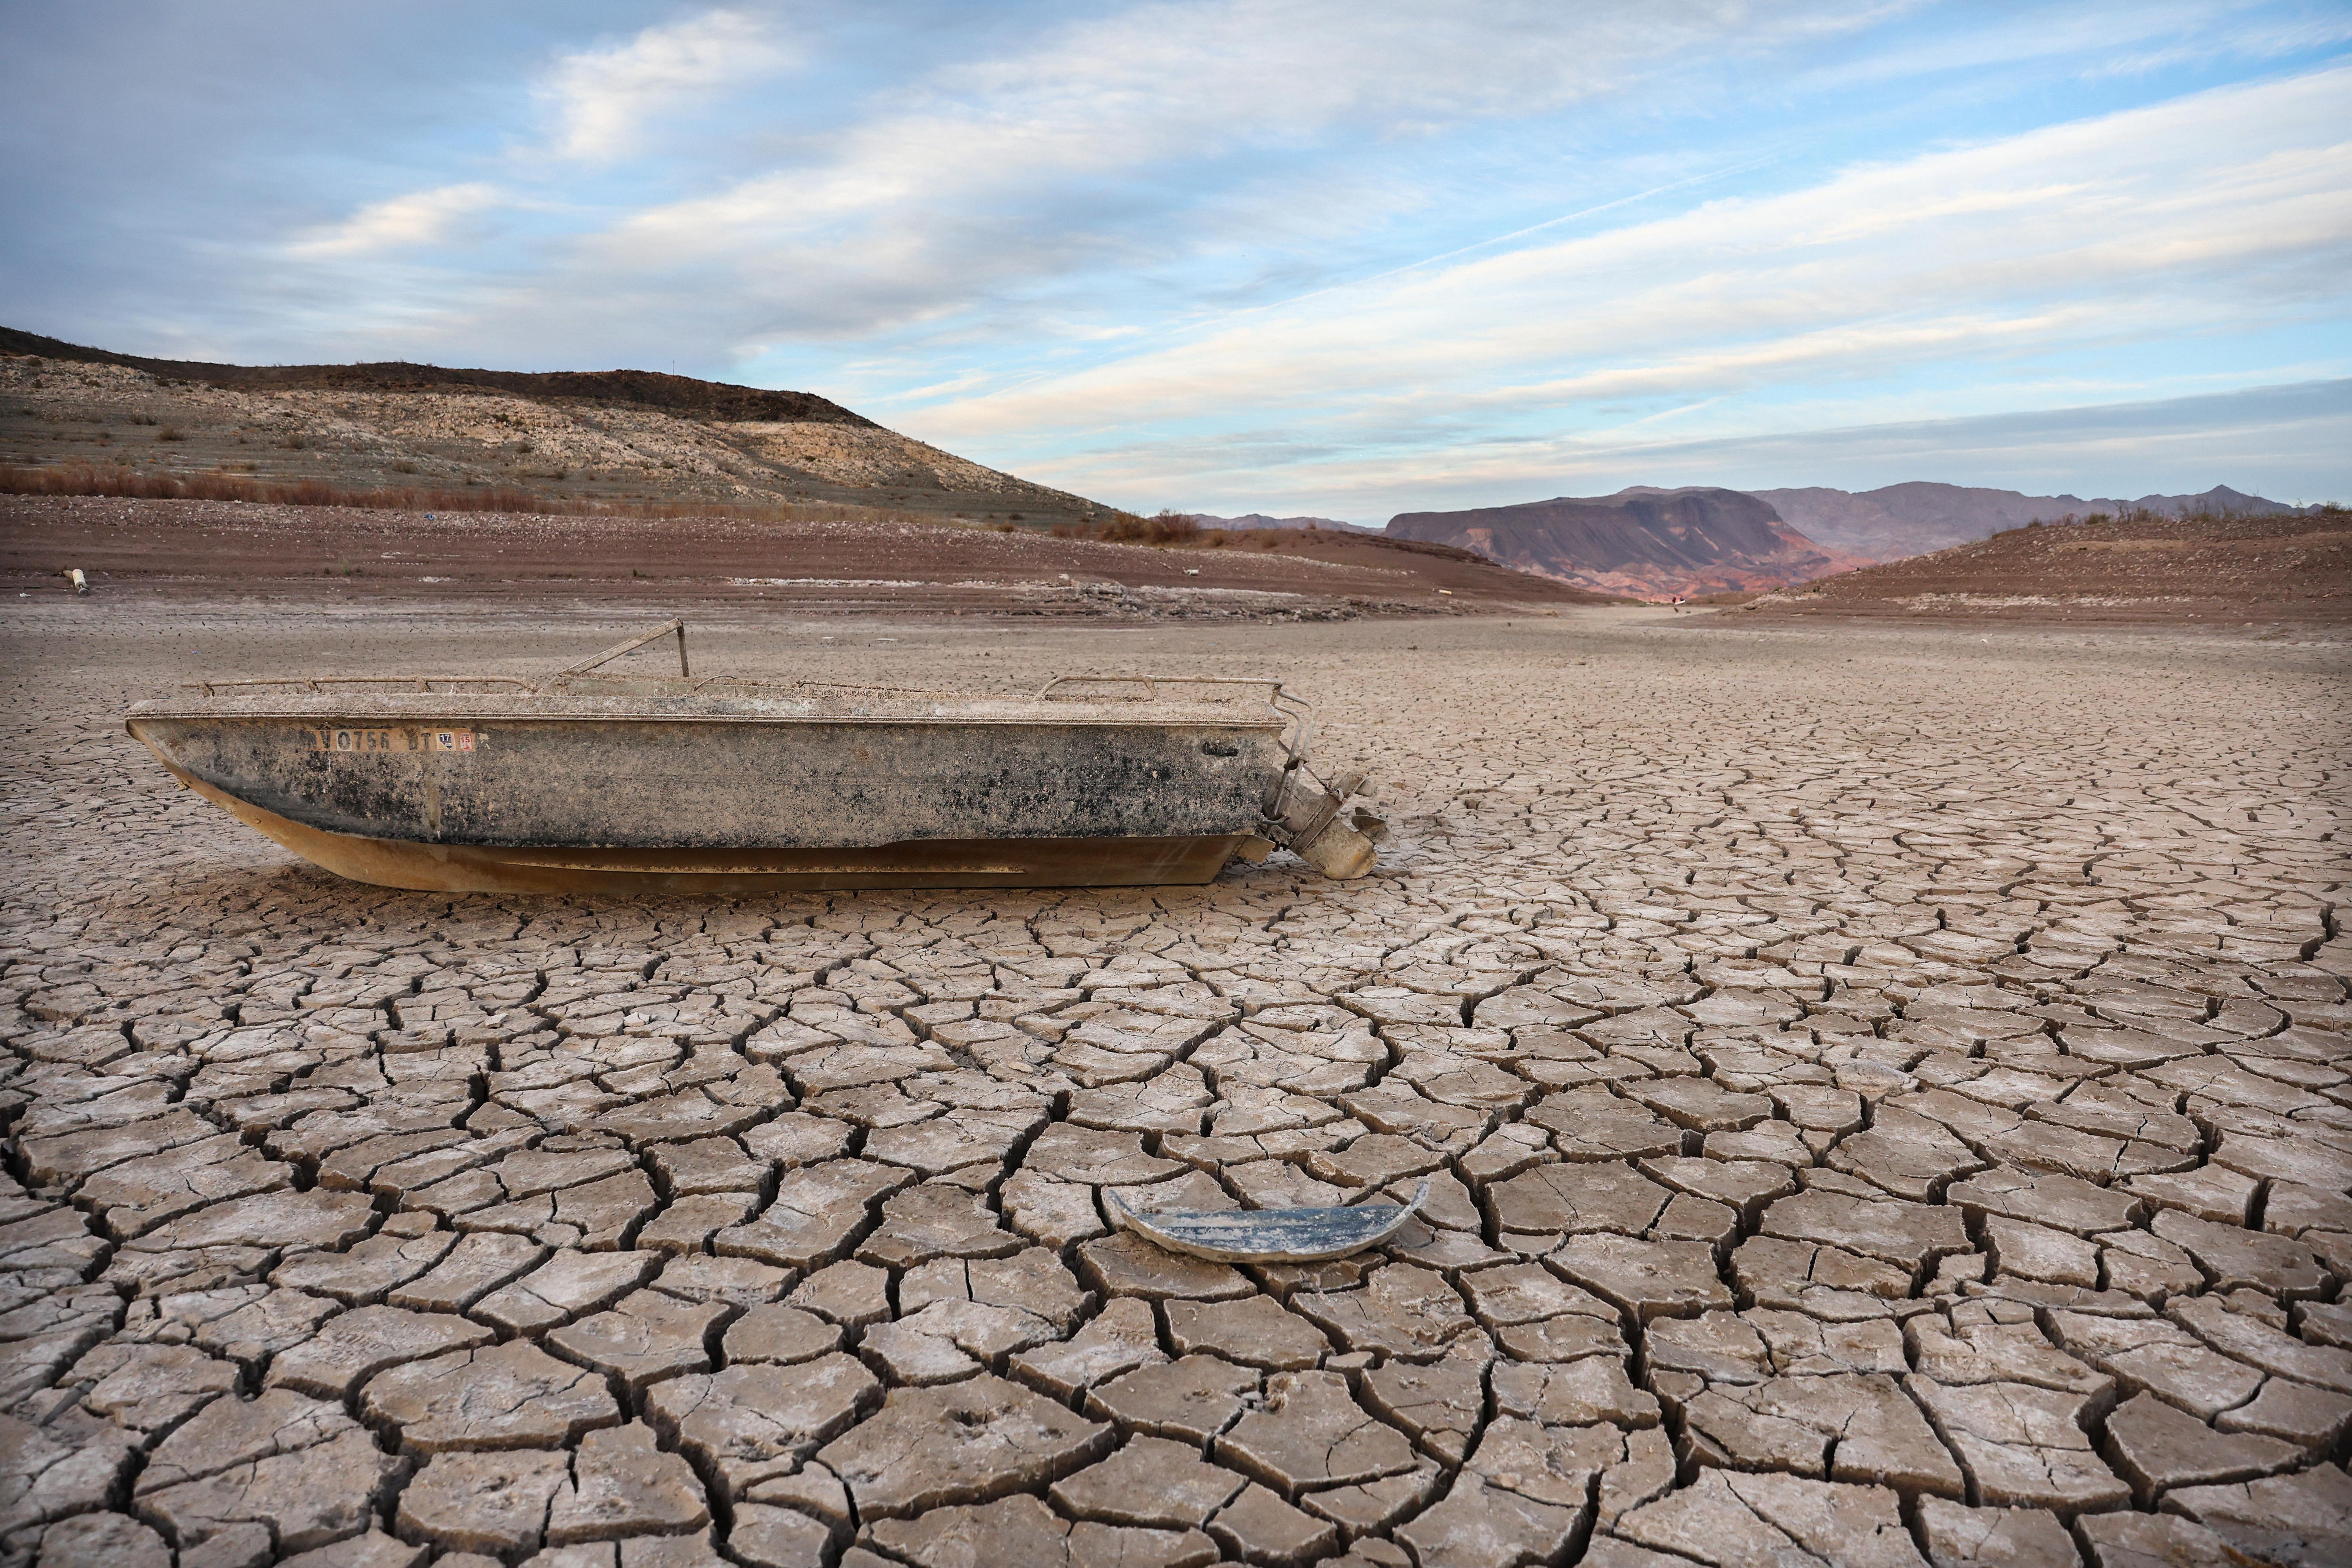 A boat sits on a cracked portion of dry land.